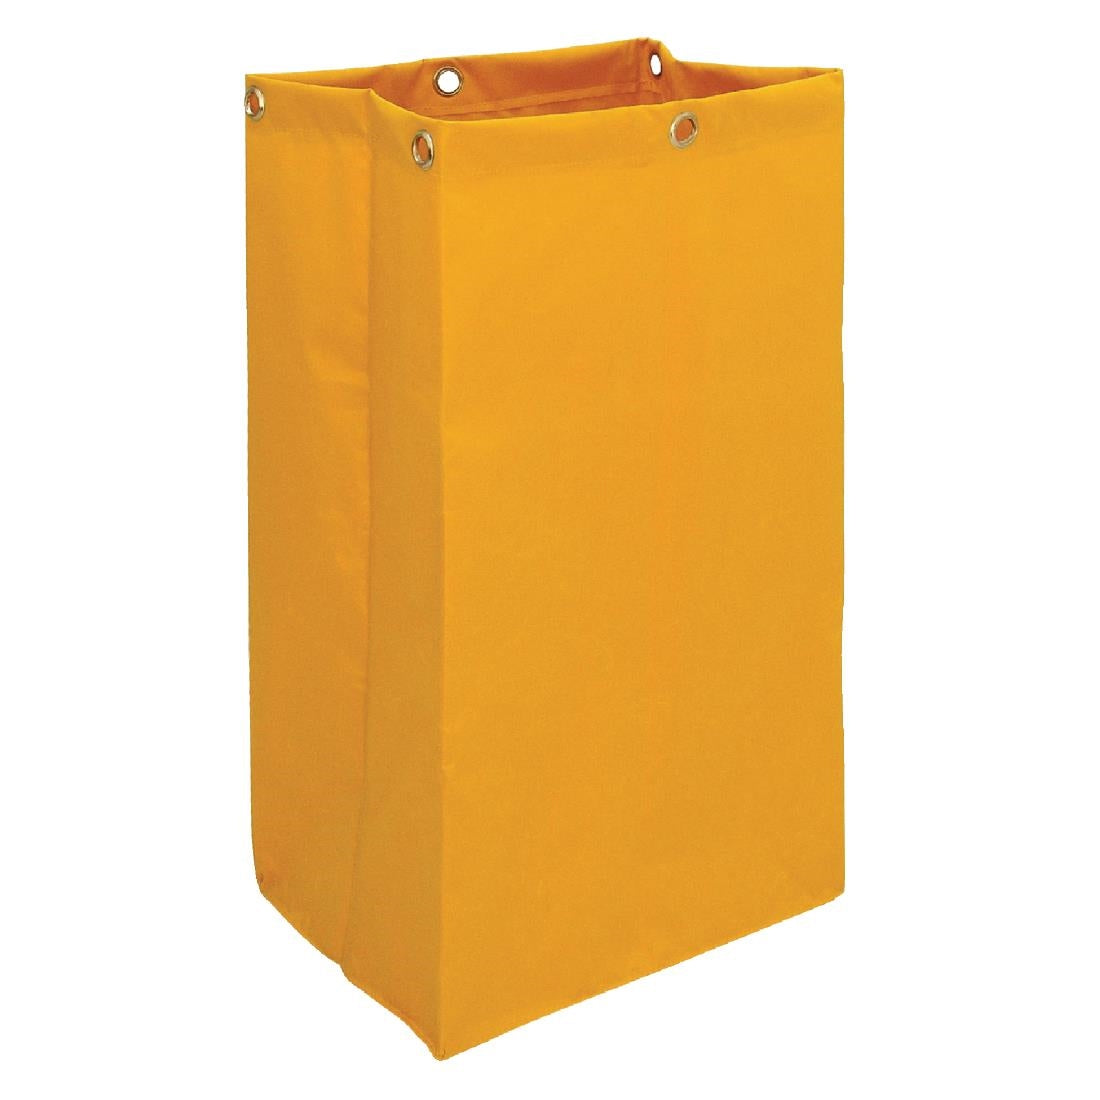 Jantex Janitorial Trolley Spare Bag JD Catering Equipment Solutions Ltd